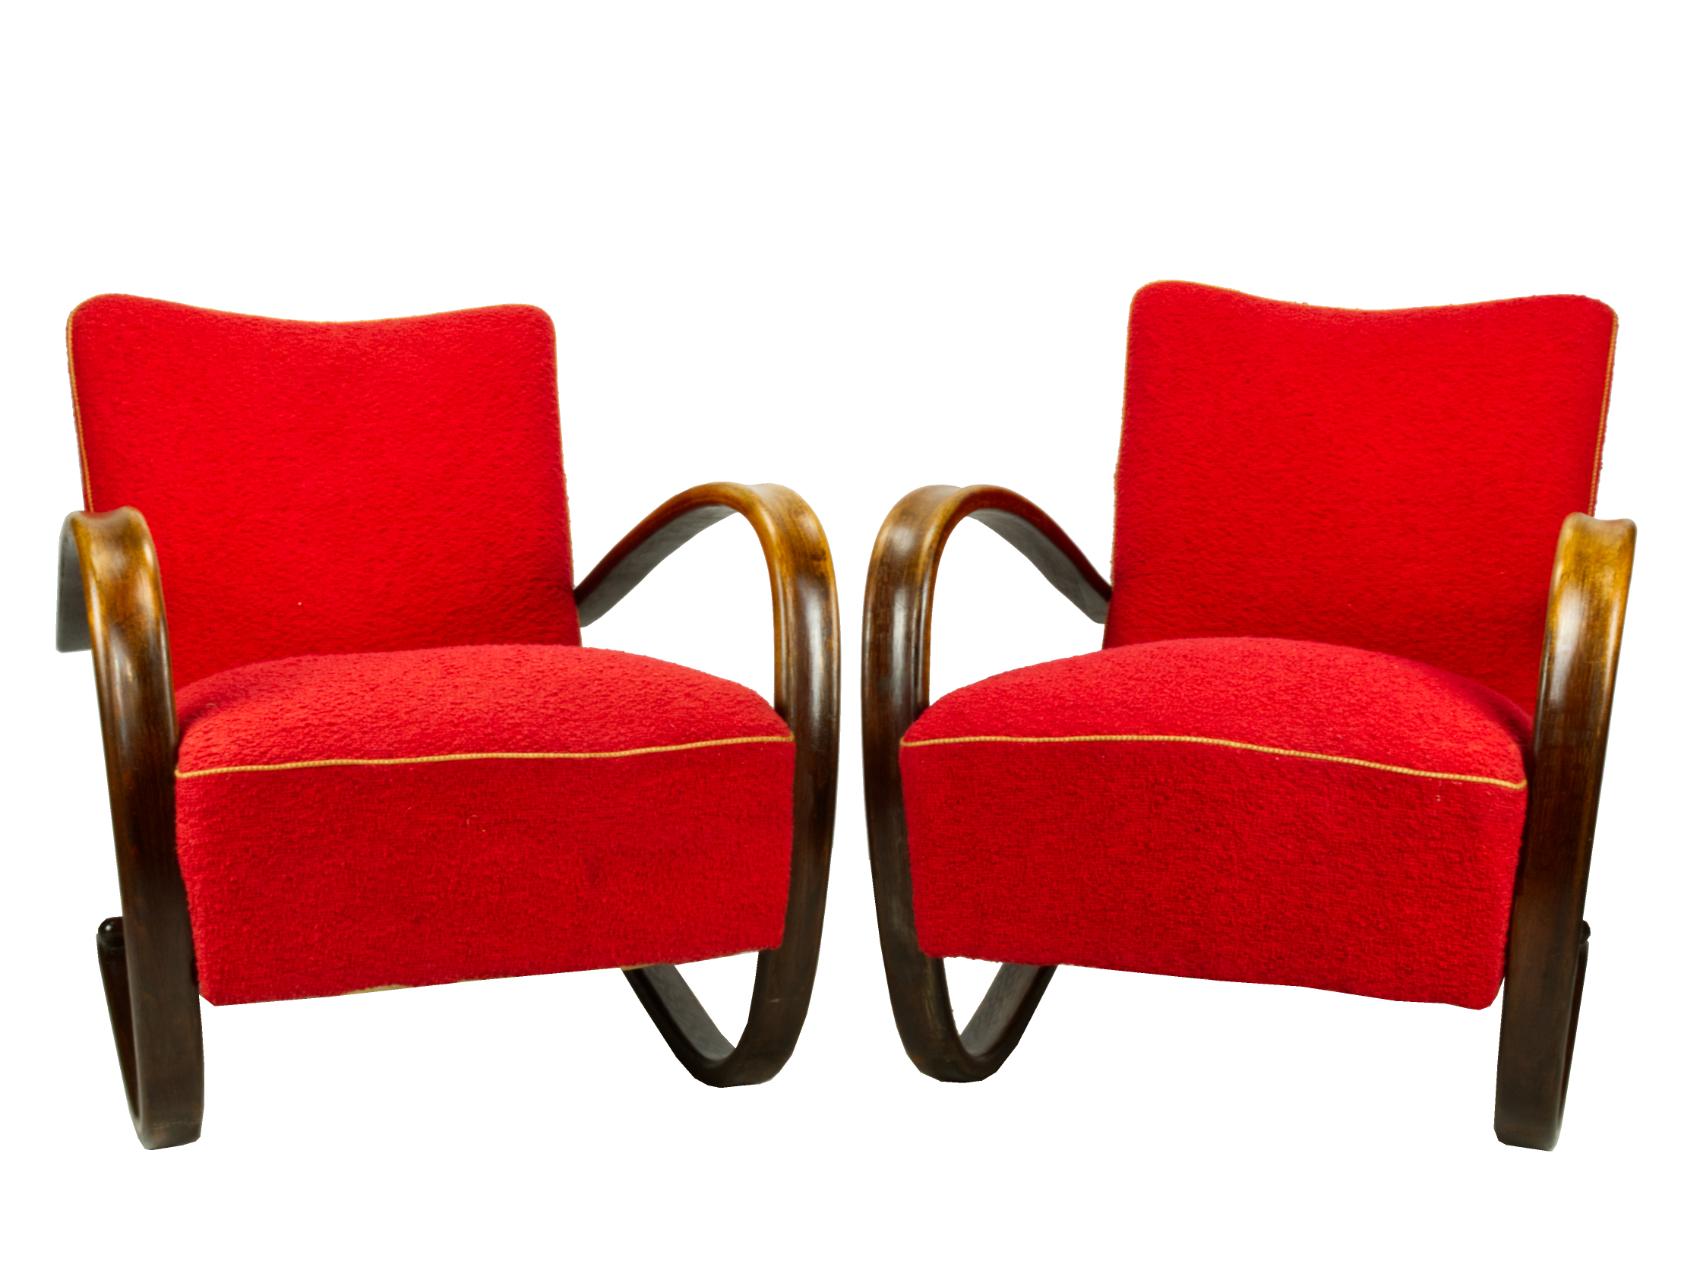 Pair of iconic H-269 lounge chairs by Jindrich Halabala for UP Závody Brno.
The chairs are in their original condition with visible traces of use. The construction is very strong, stable and in a good condition, but they need a new finish. 
An